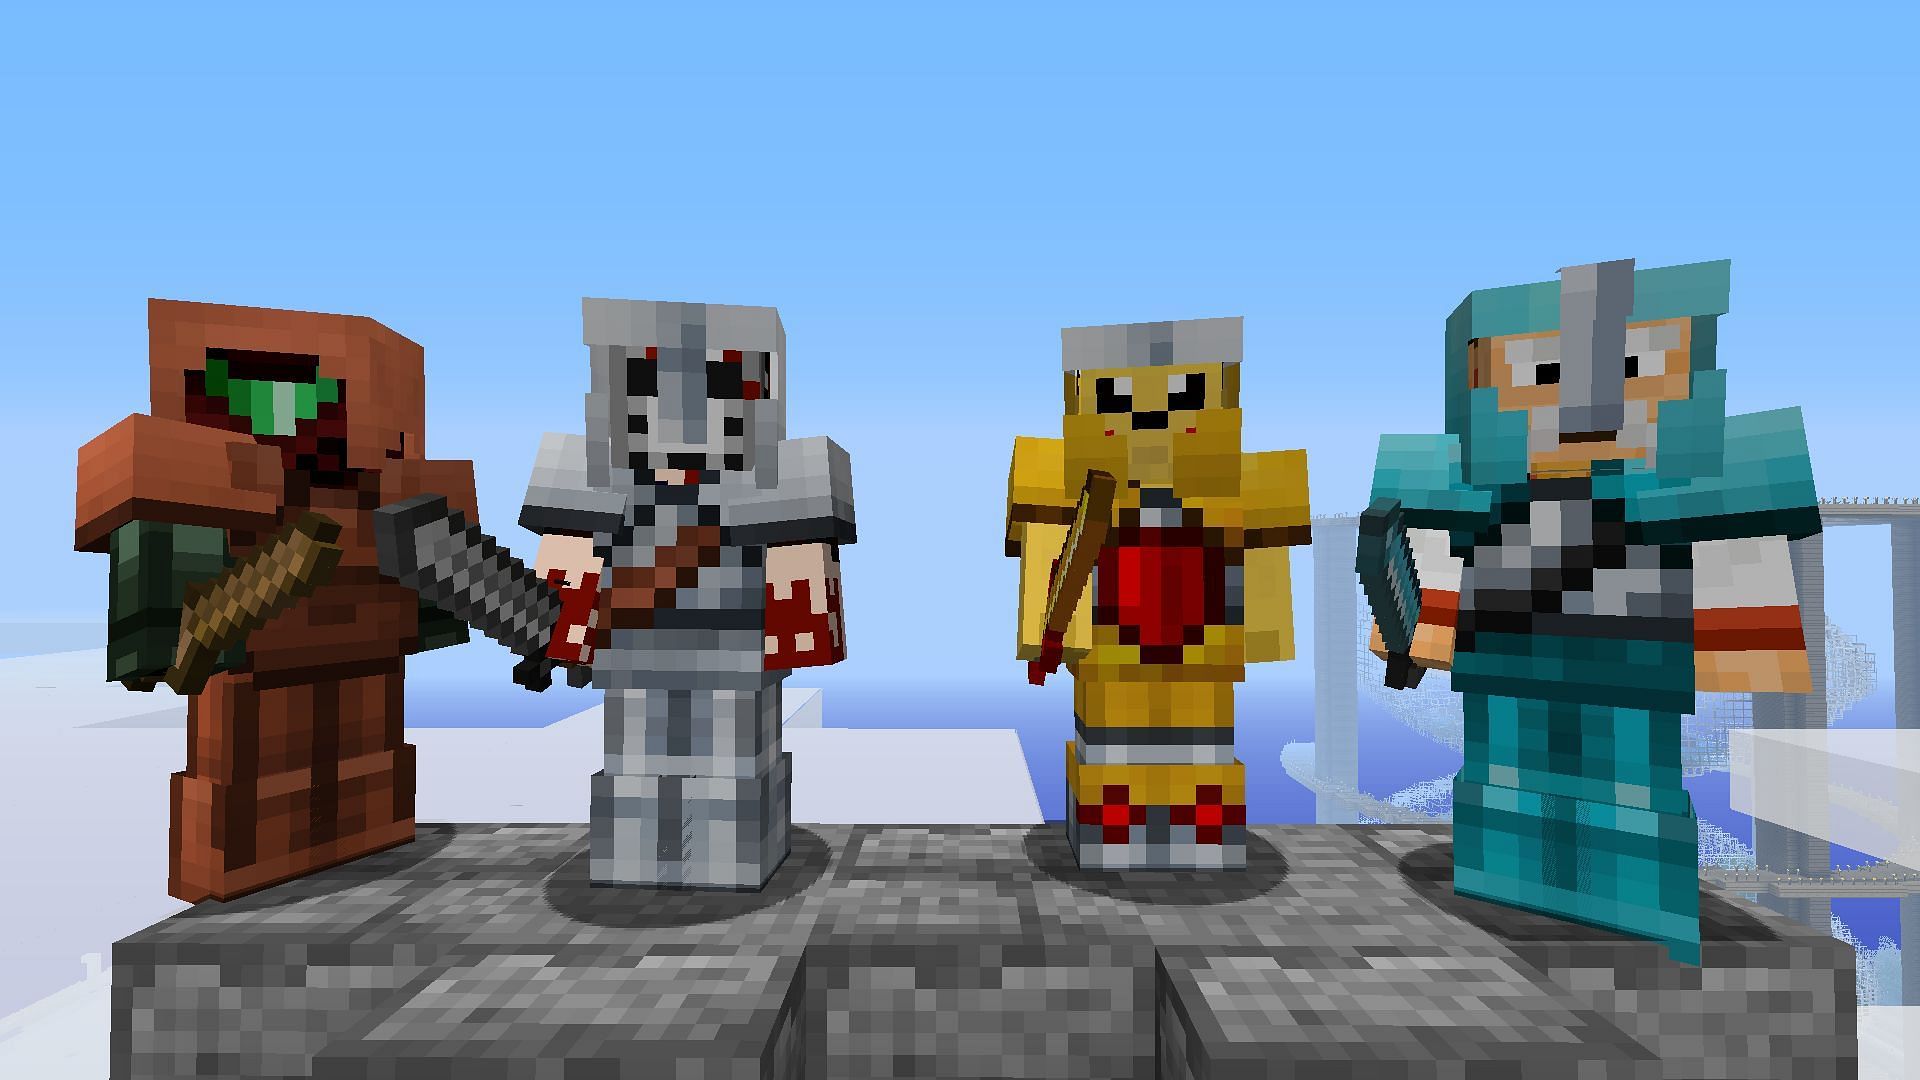 Different types of armor can be crafted in Minecraft (Image via Minecraft)